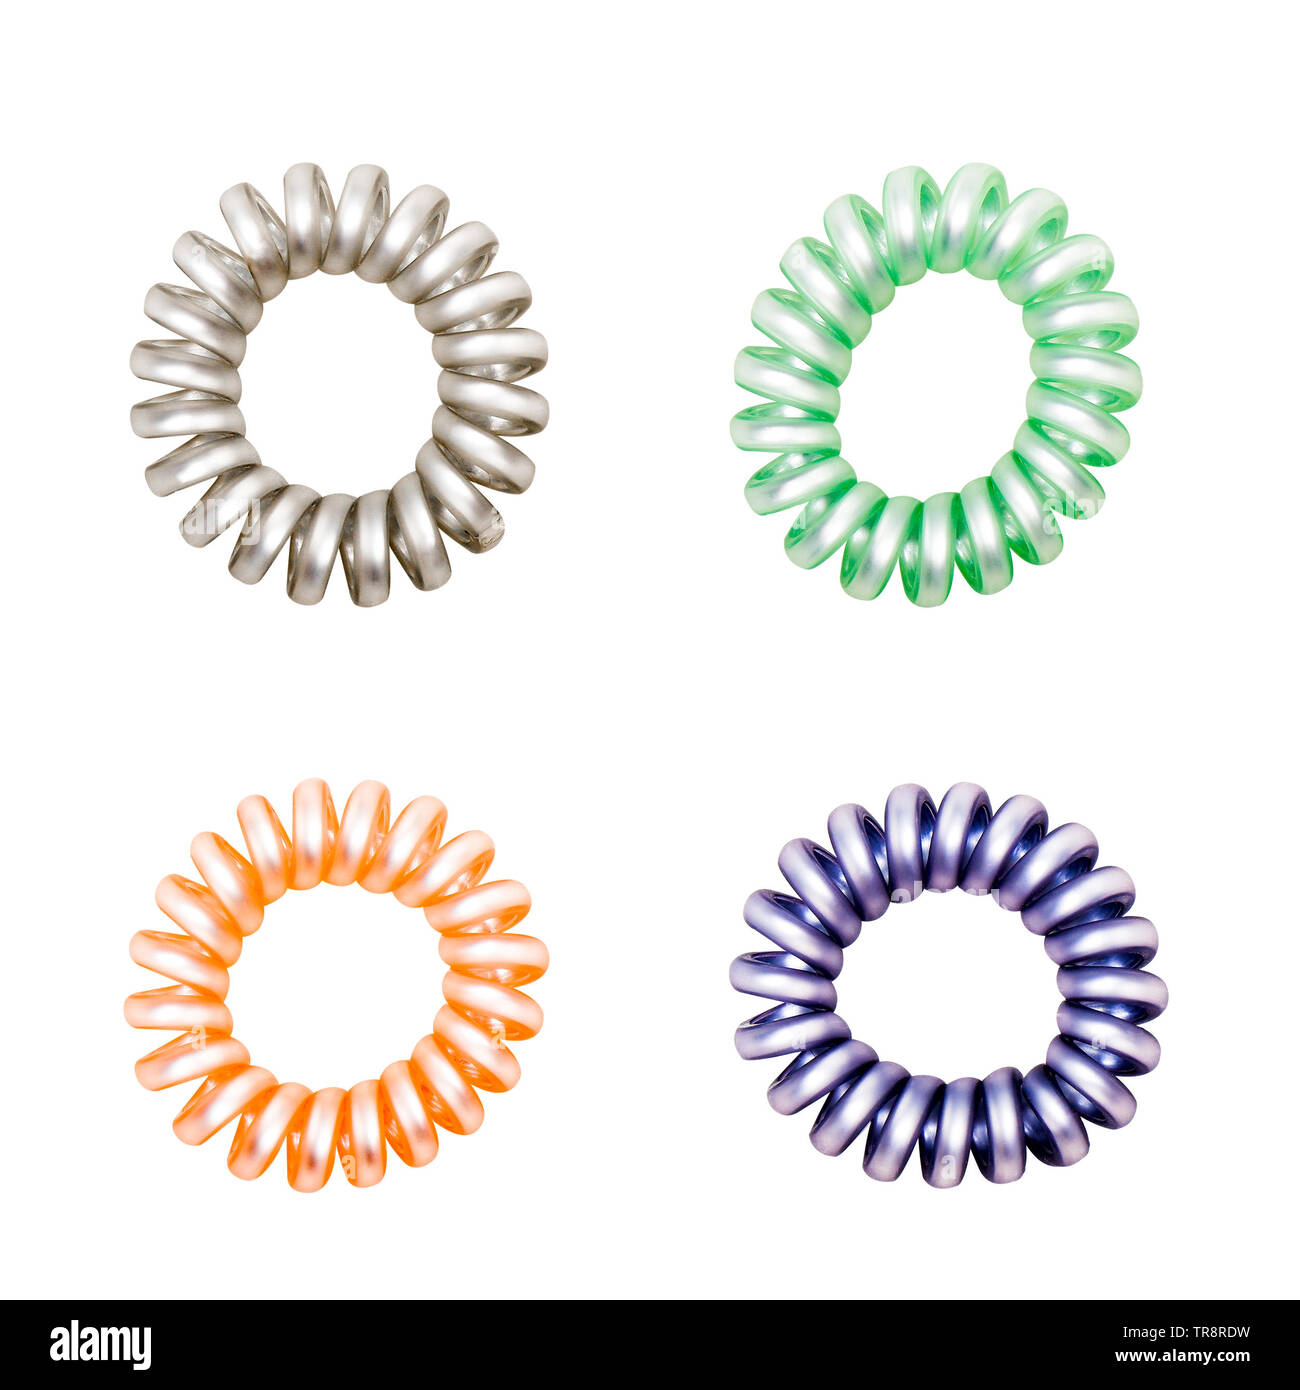 Colorful Hair Band Isolated on White Background with Clipping Path. Closeup  of Spiral Four Colorful Rubber Bands for Fashion Accessories. Beautiful  Stock Photo - Alamy